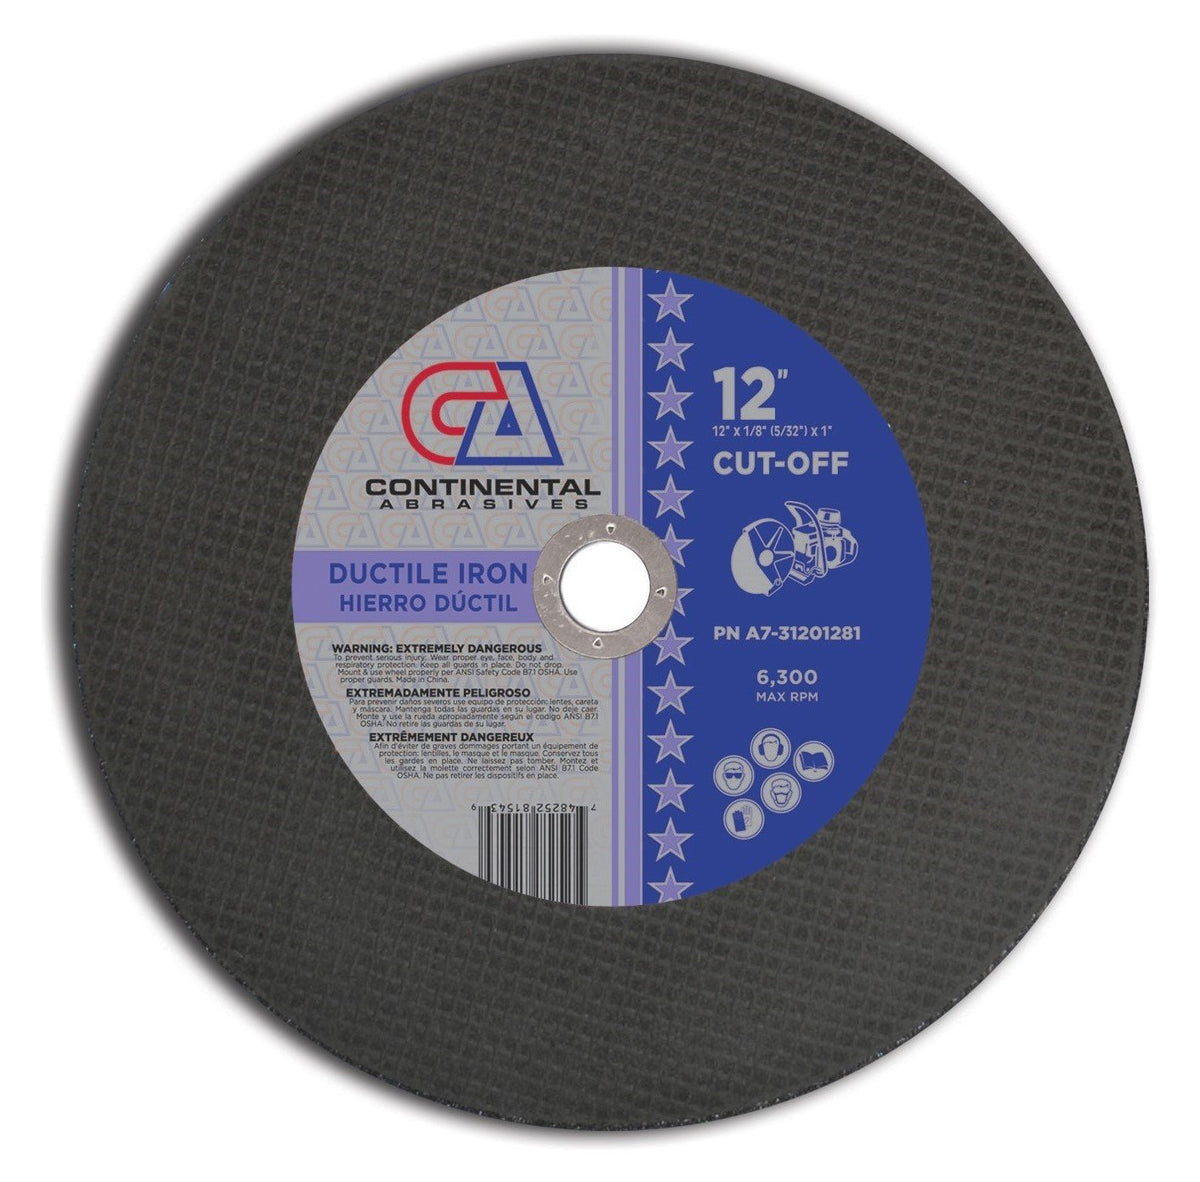 12" x 1/8" (5/32") x 1" Type 1 Gas Saw Wheels for Ductile Iron (Pack of 10)